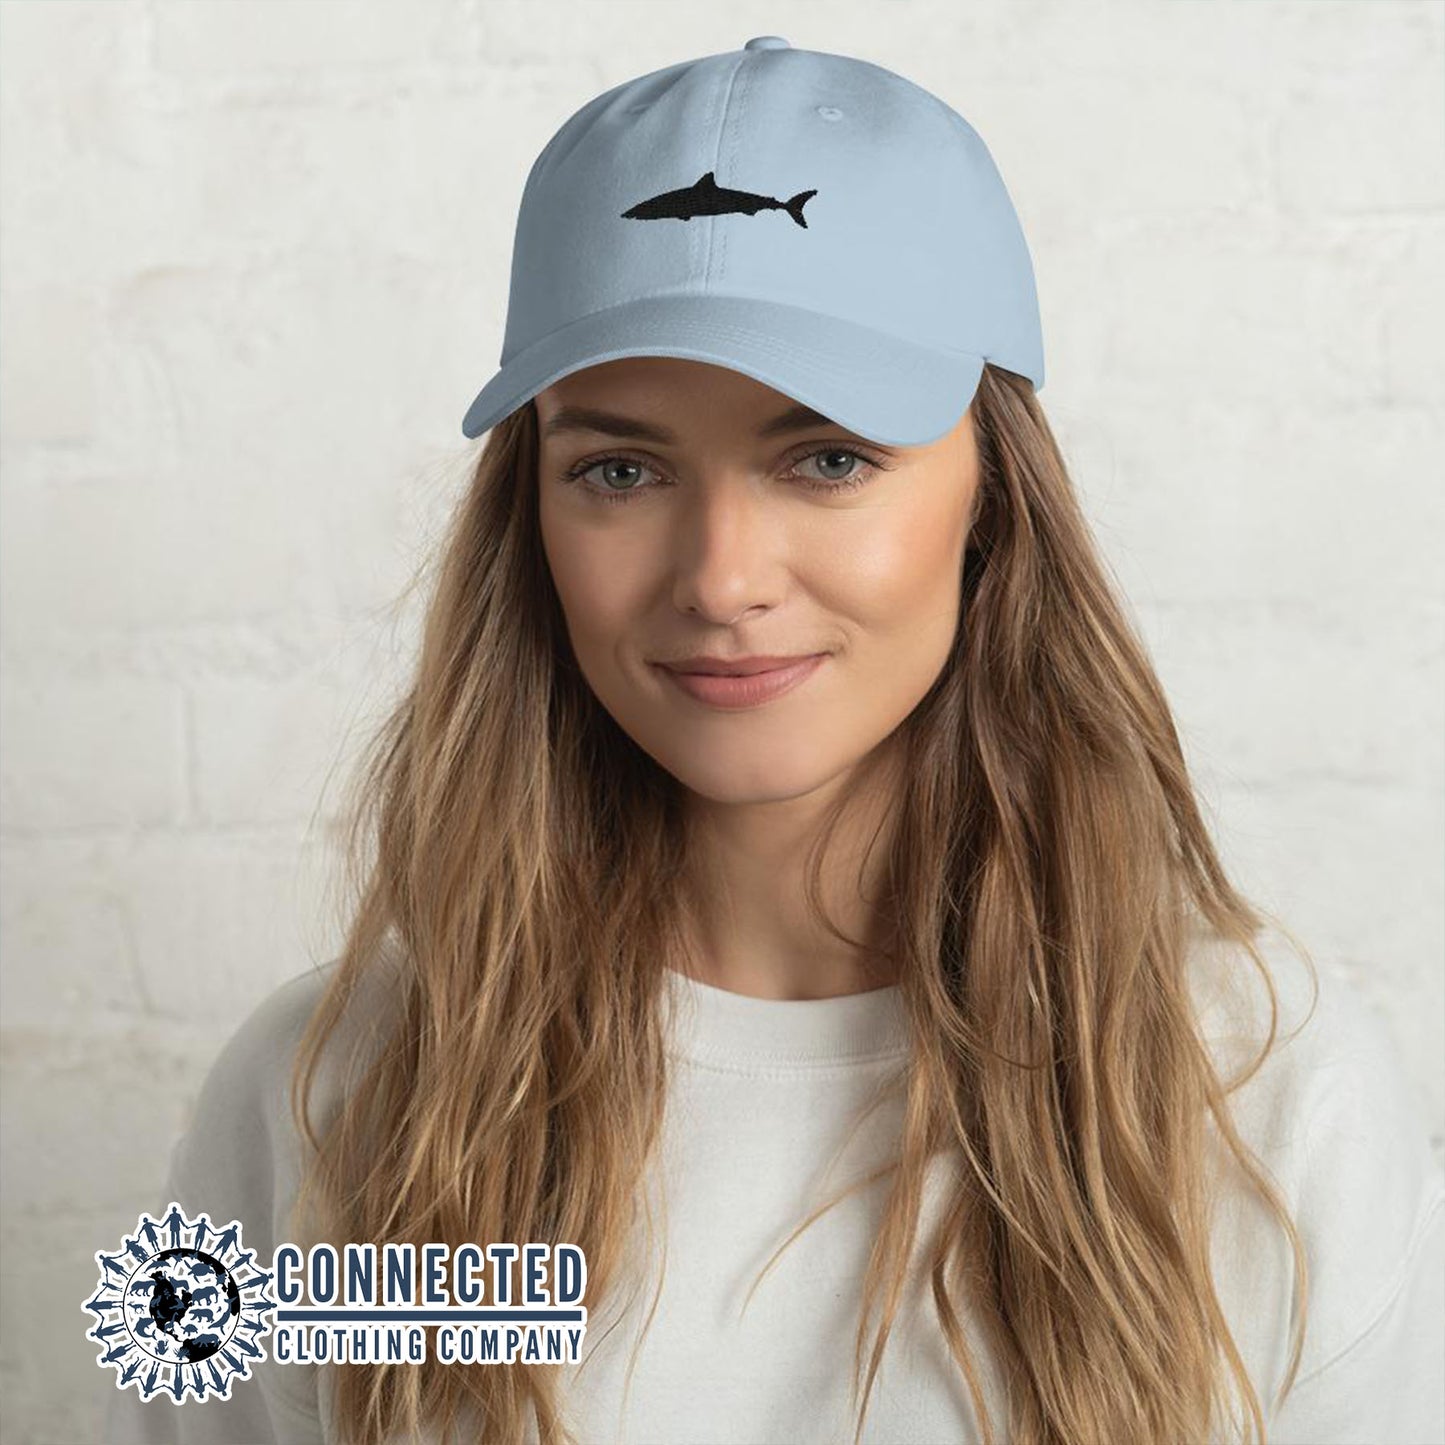 Model Wearing Blue Shark Cotton Cap - Connected Clothing Company - Ethical & Sustainable Clothing That Gives Back - 10% donated to Oceana shark conservation